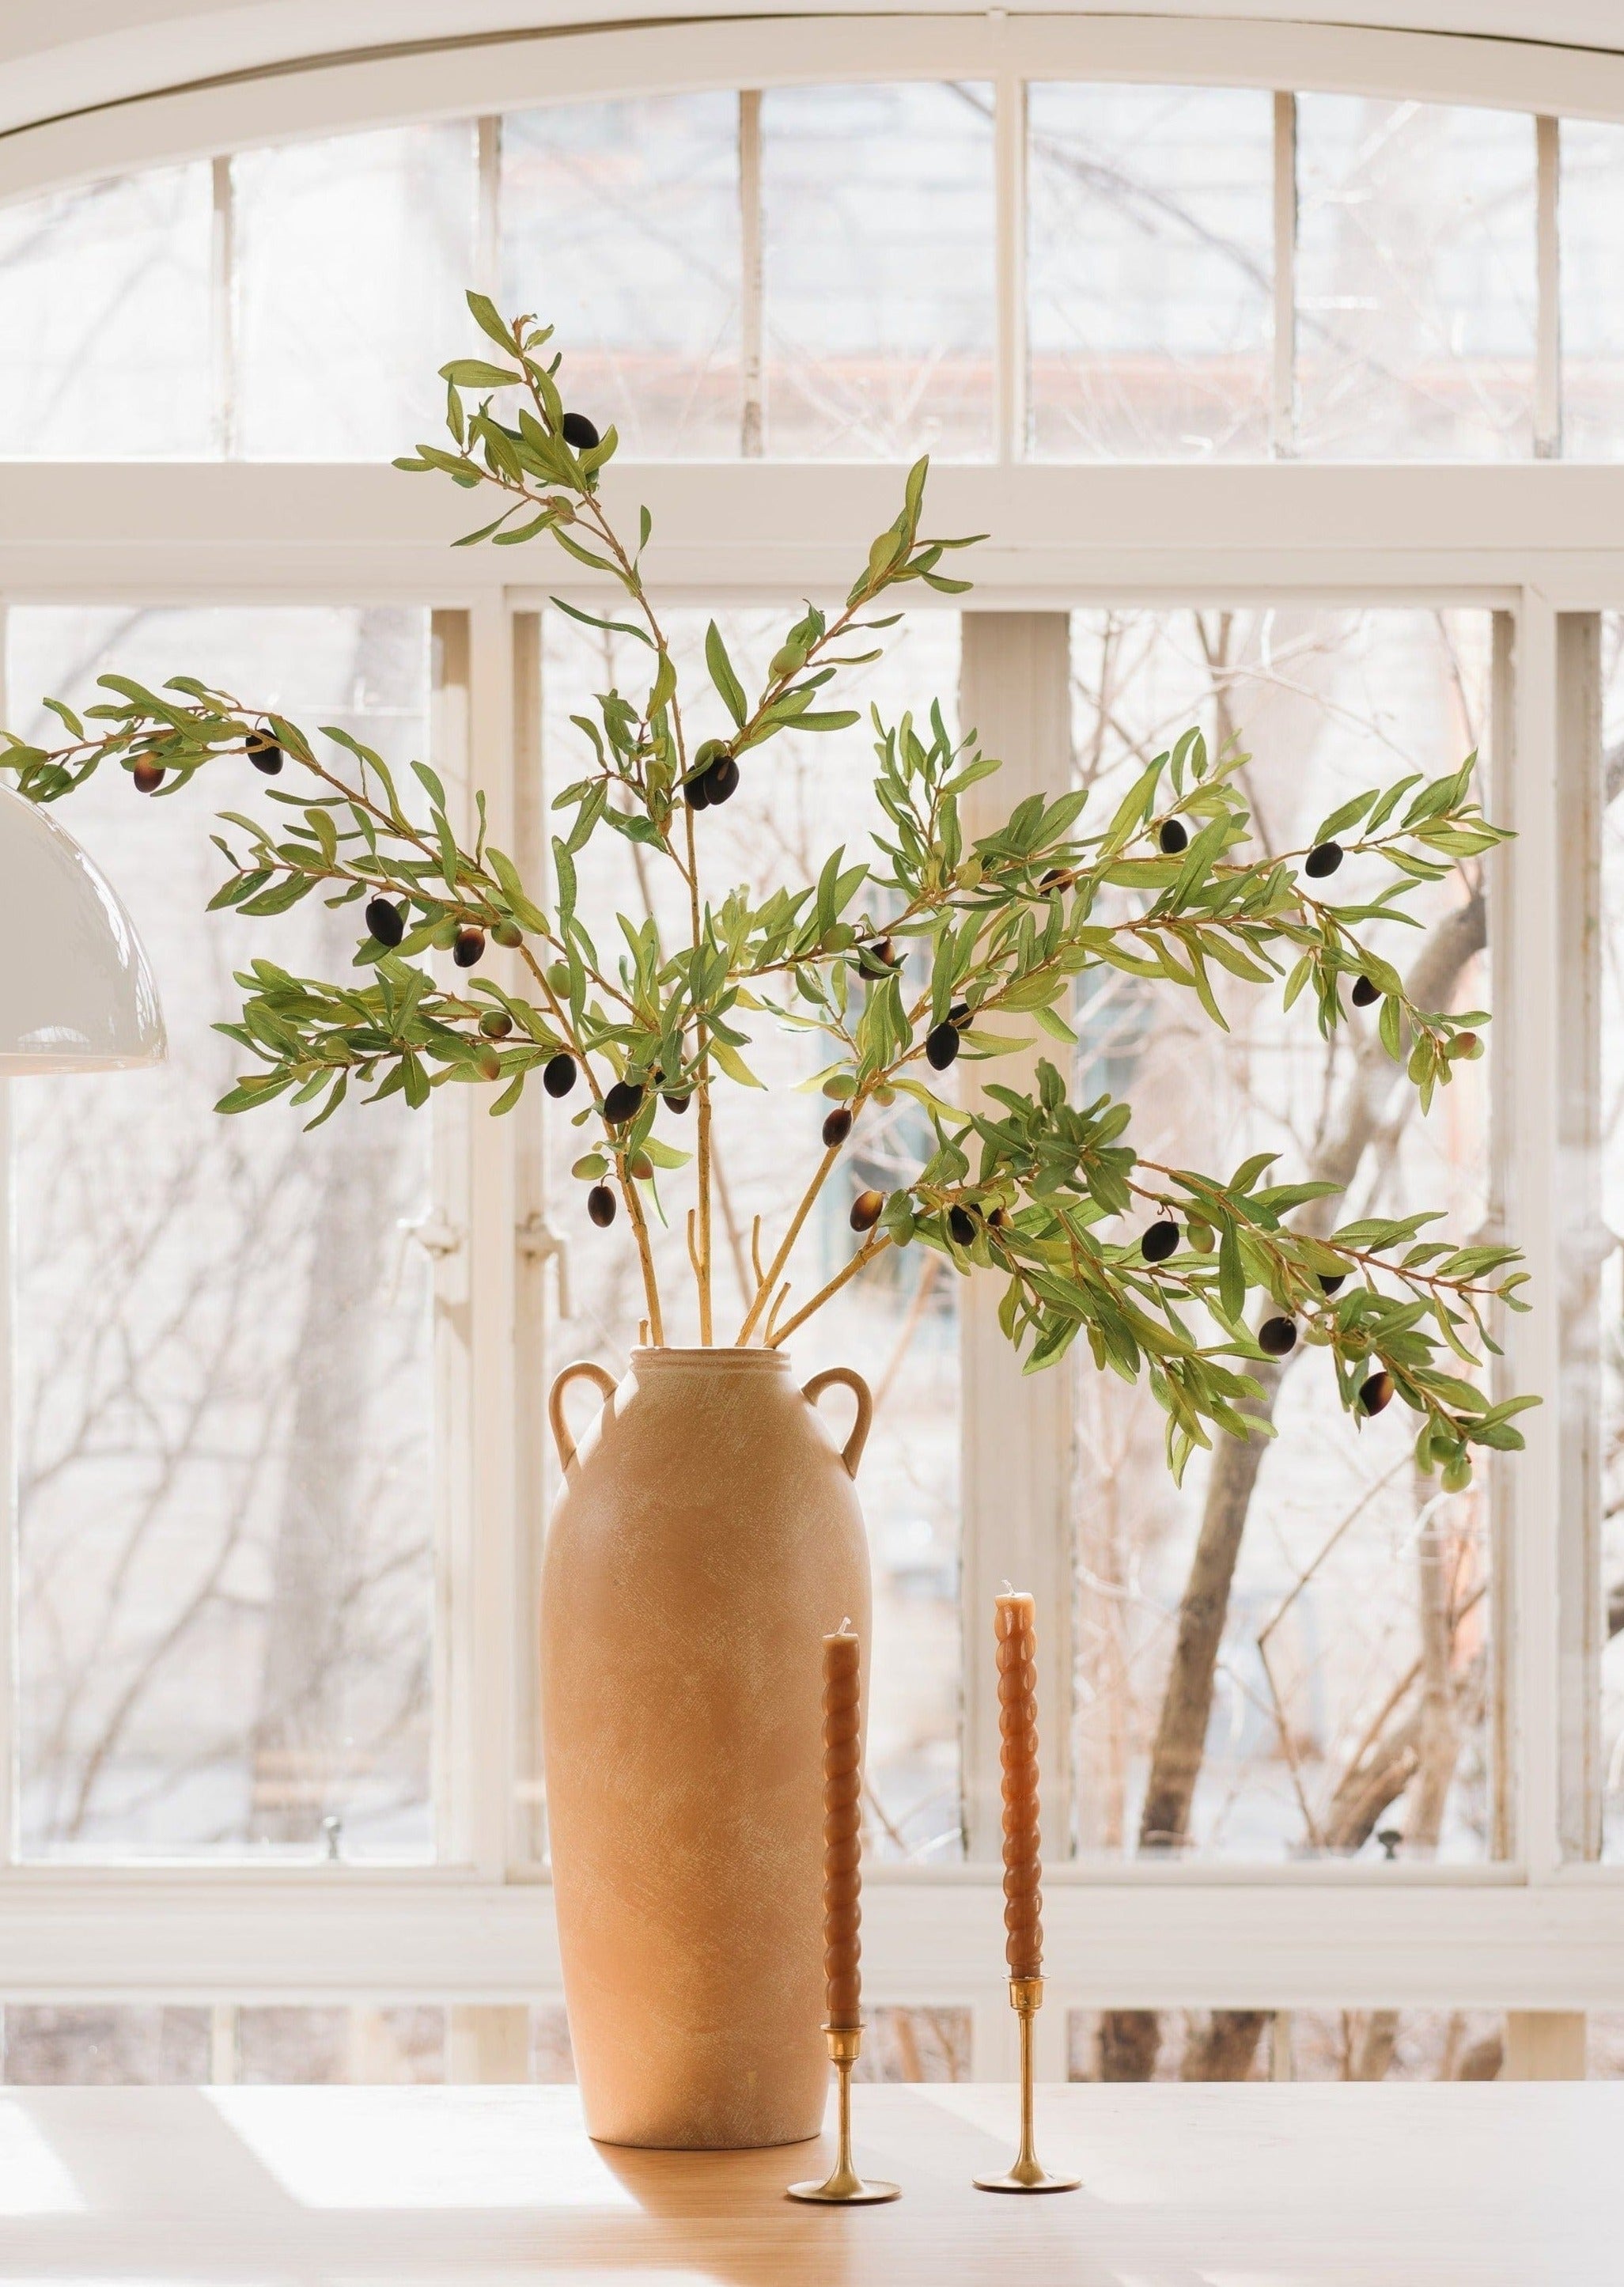 Afloral Tall Terra Cotta Vase with Handles Styled with Faux Olive Branches